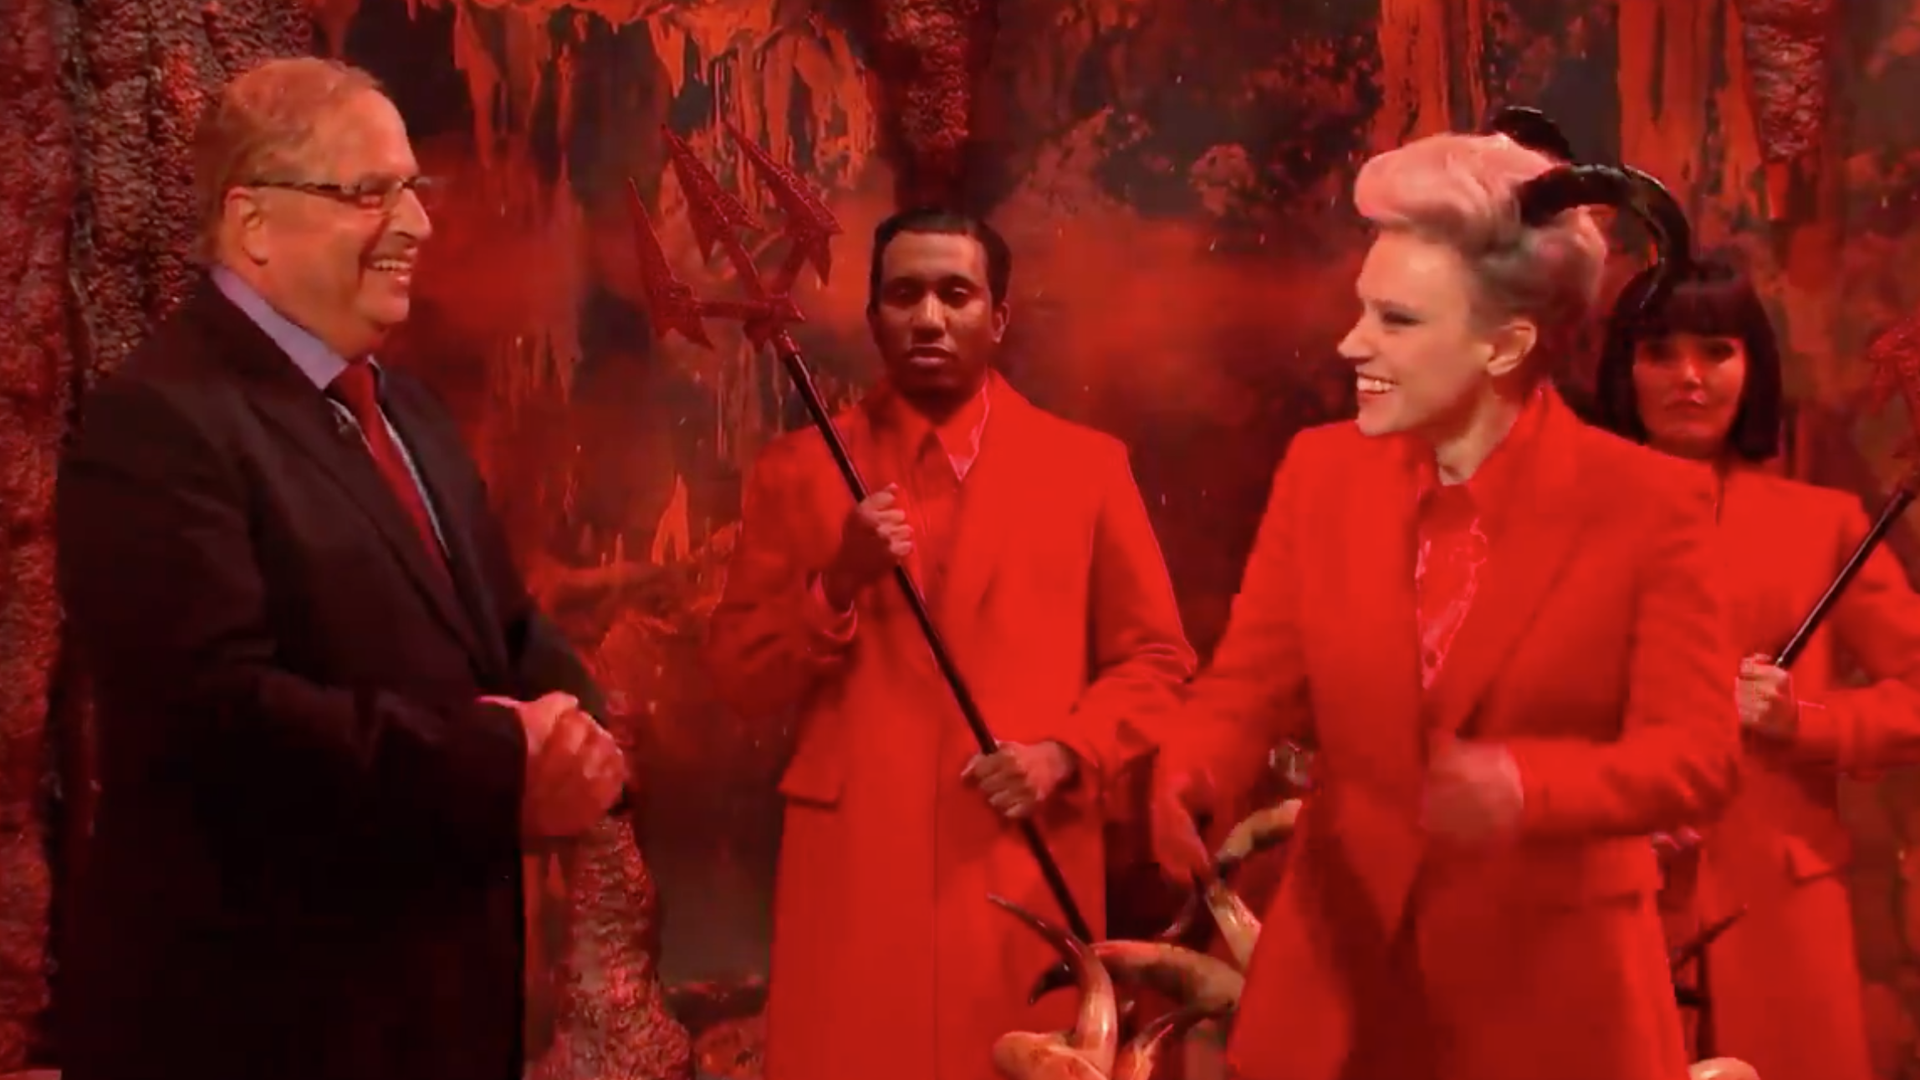 A screenshot from the latest "SNL" cold open, set in hell